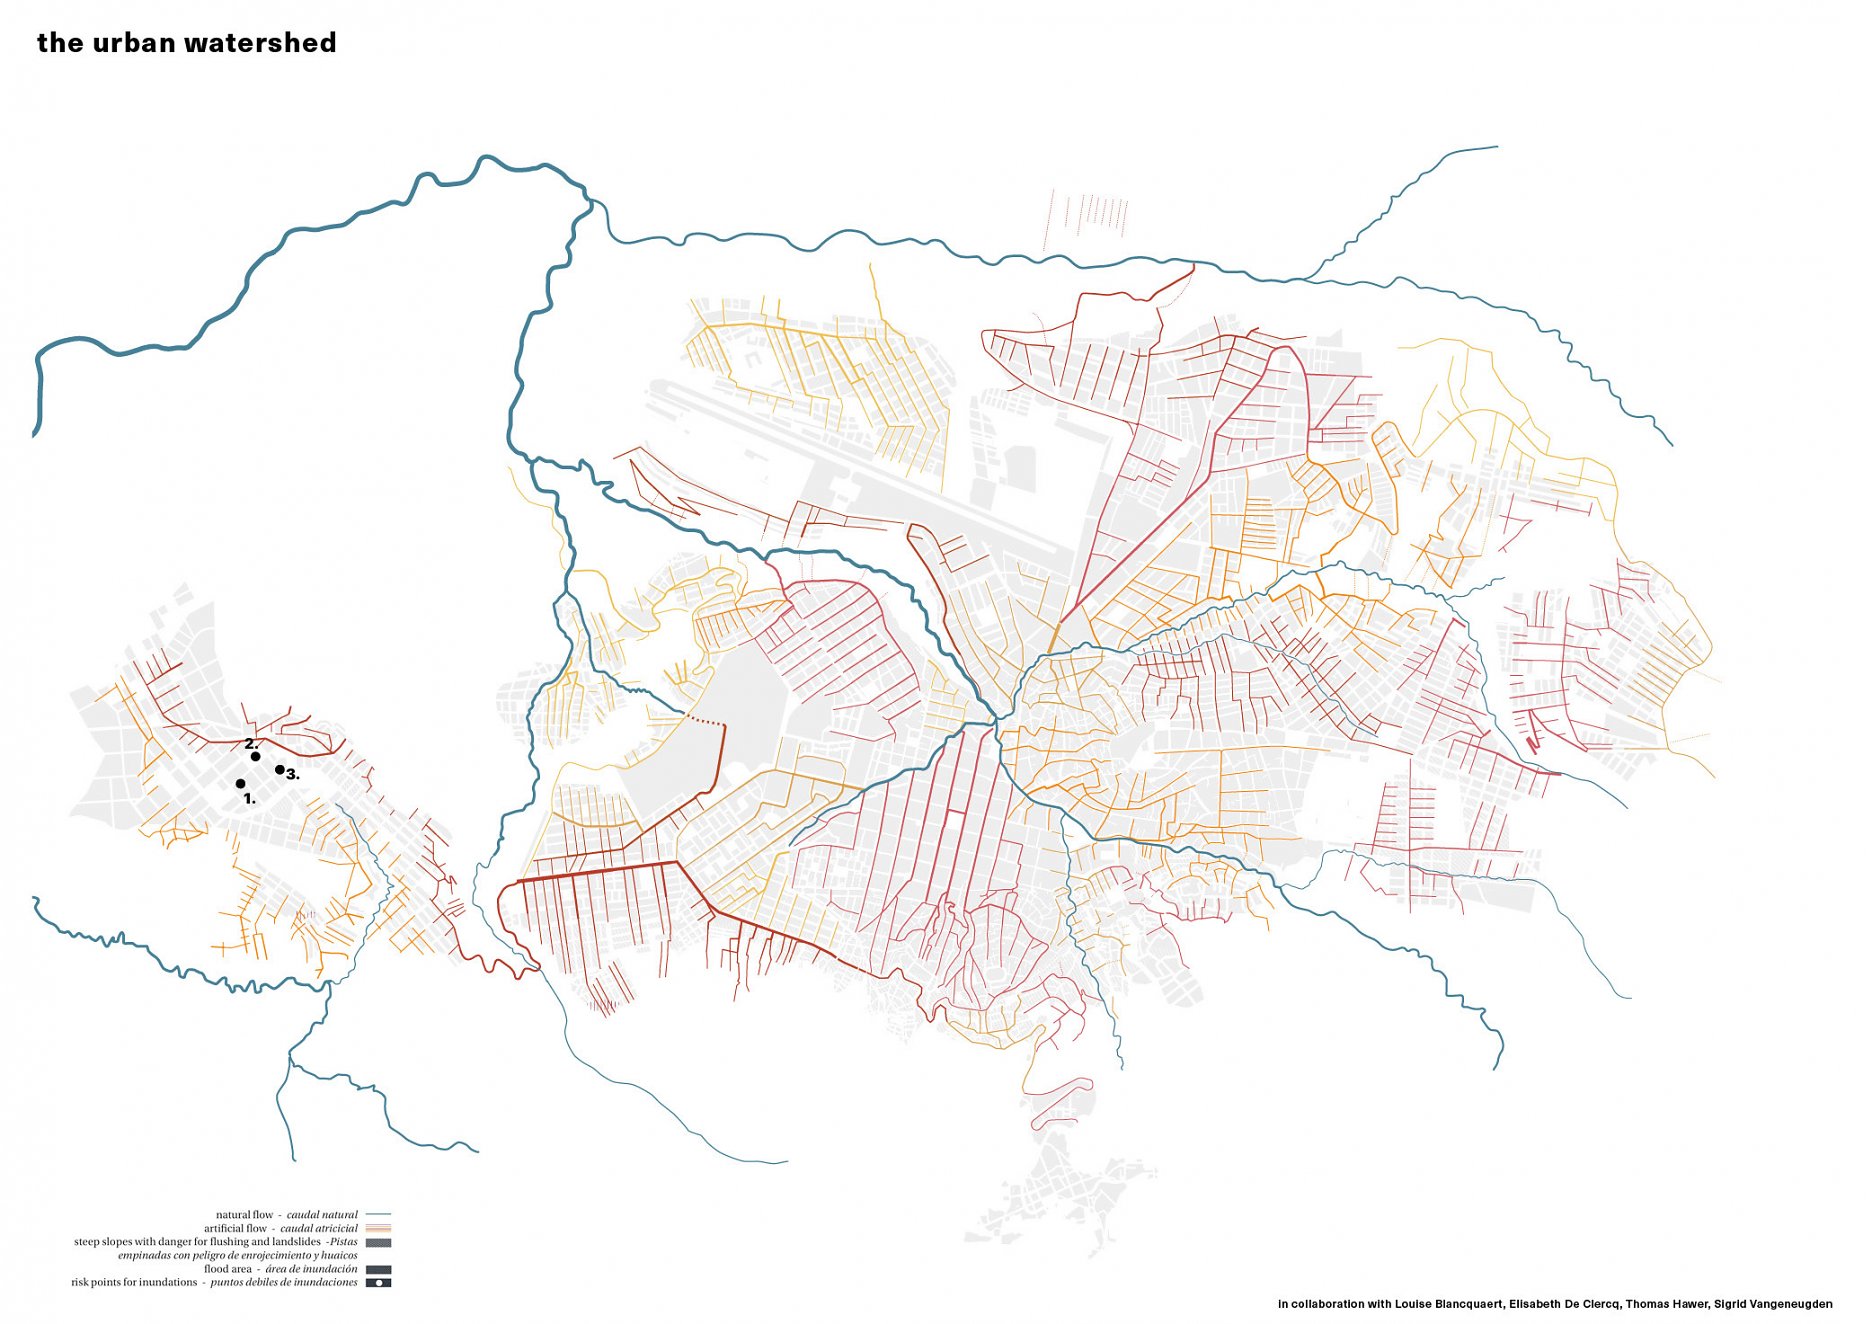 The urban watershed